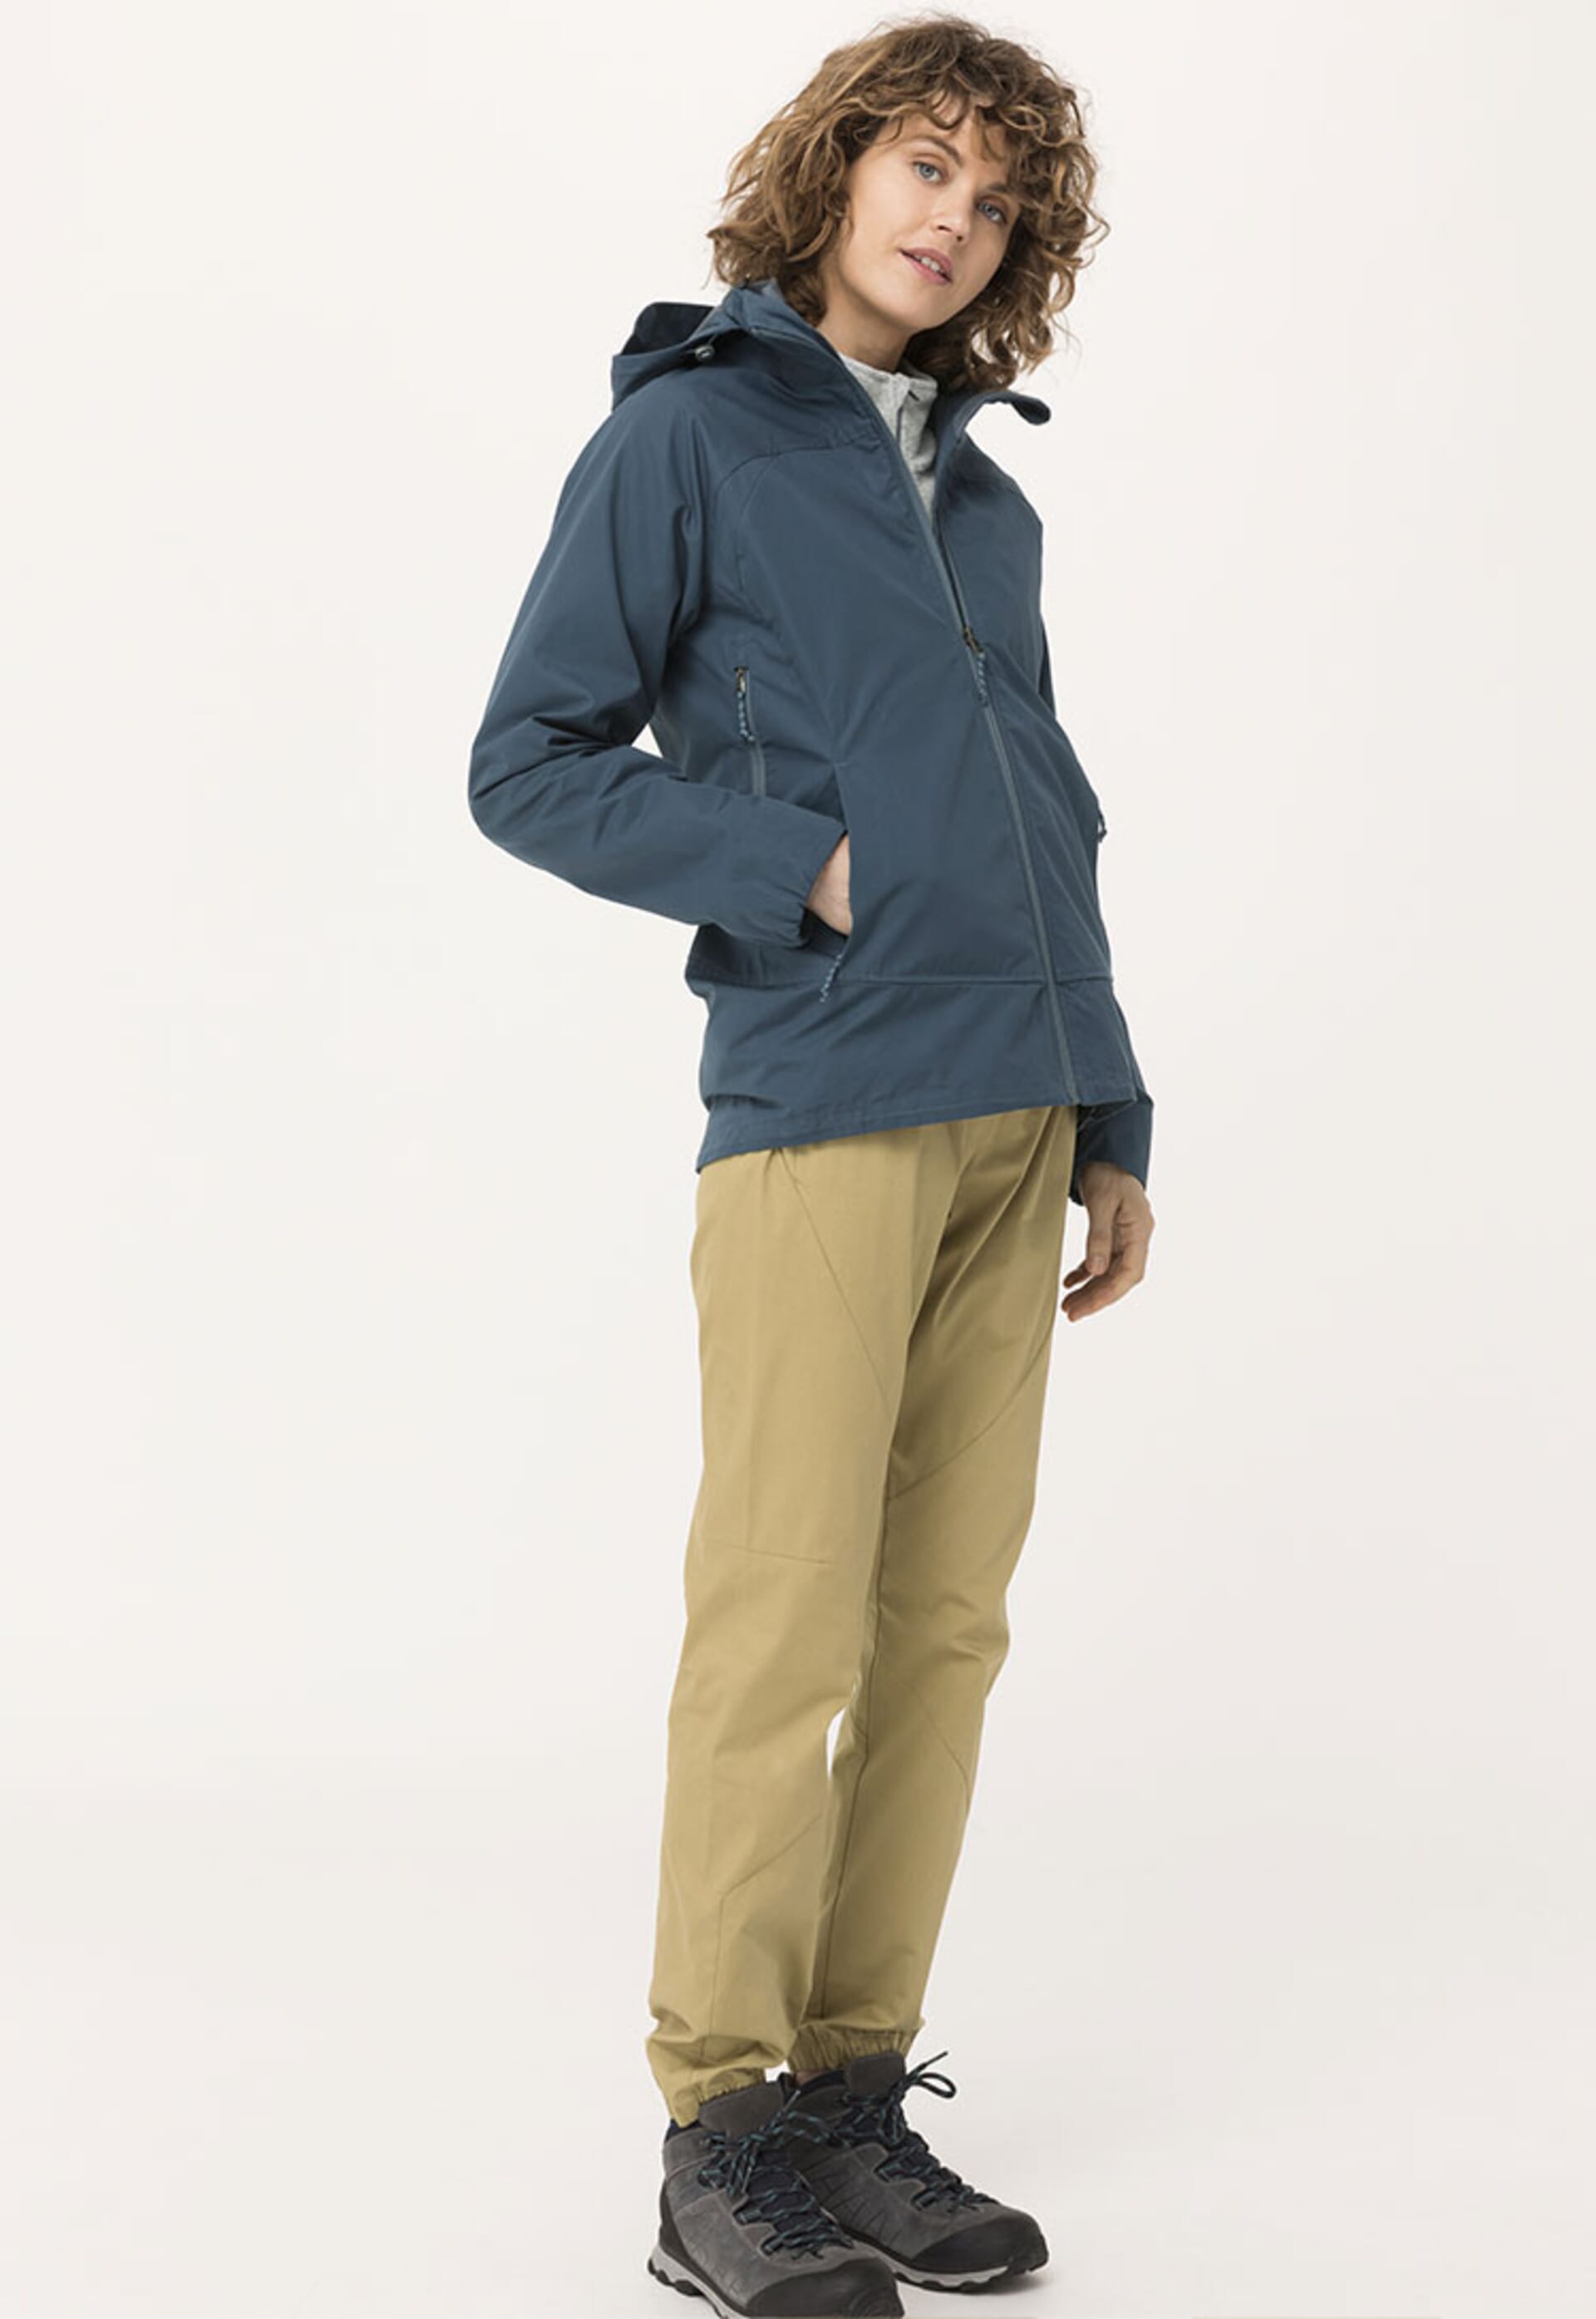 Wax jacket with water-repellent beeswax